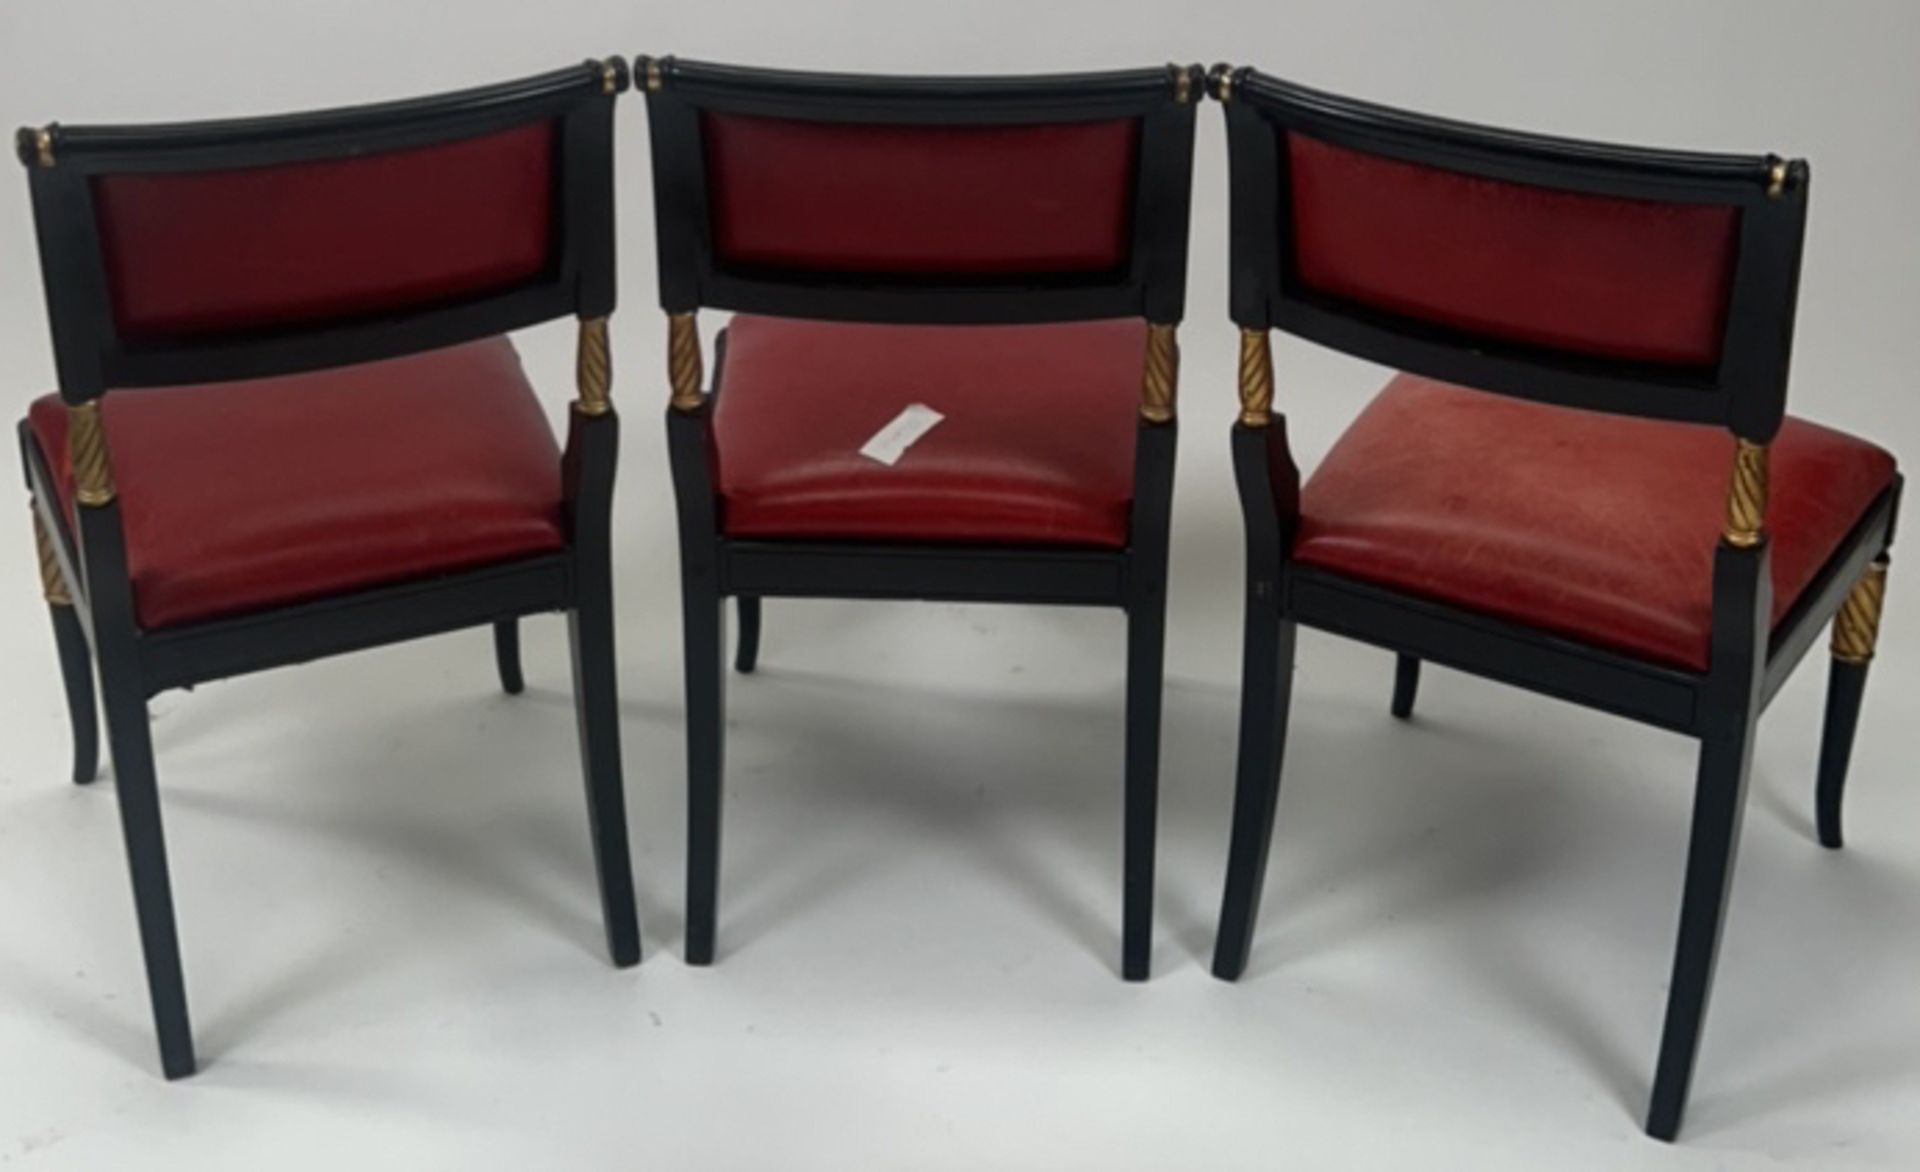 Trio of regency ebonised gilt dining chairs - Image 2 of 7